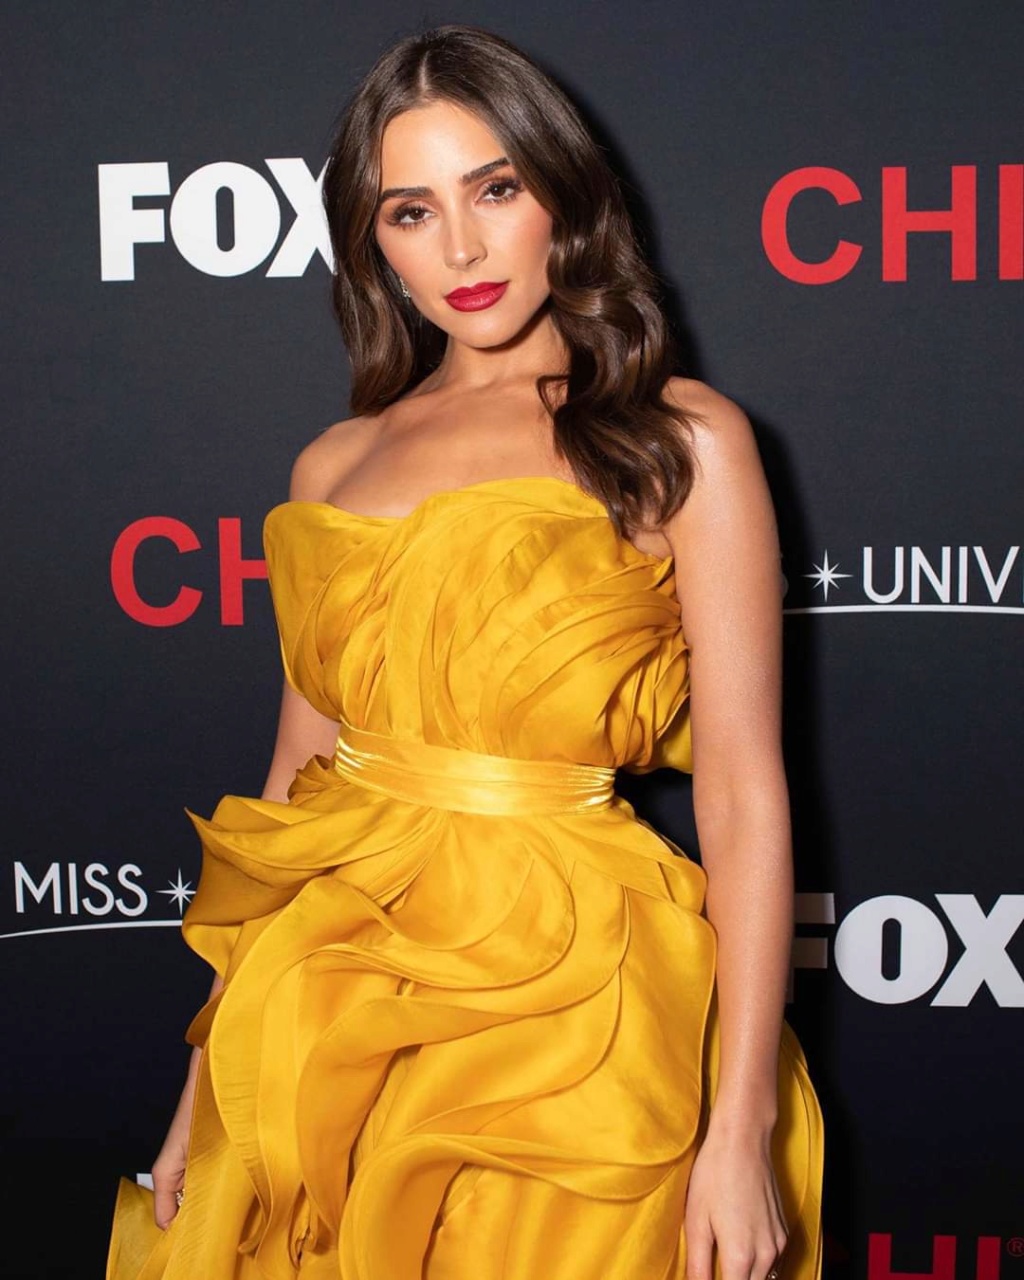 ♔ Official Thread of MISS UNIVERSE® 2012- Olivia Culpo - USA ♔ - Page 9 Fb_14387